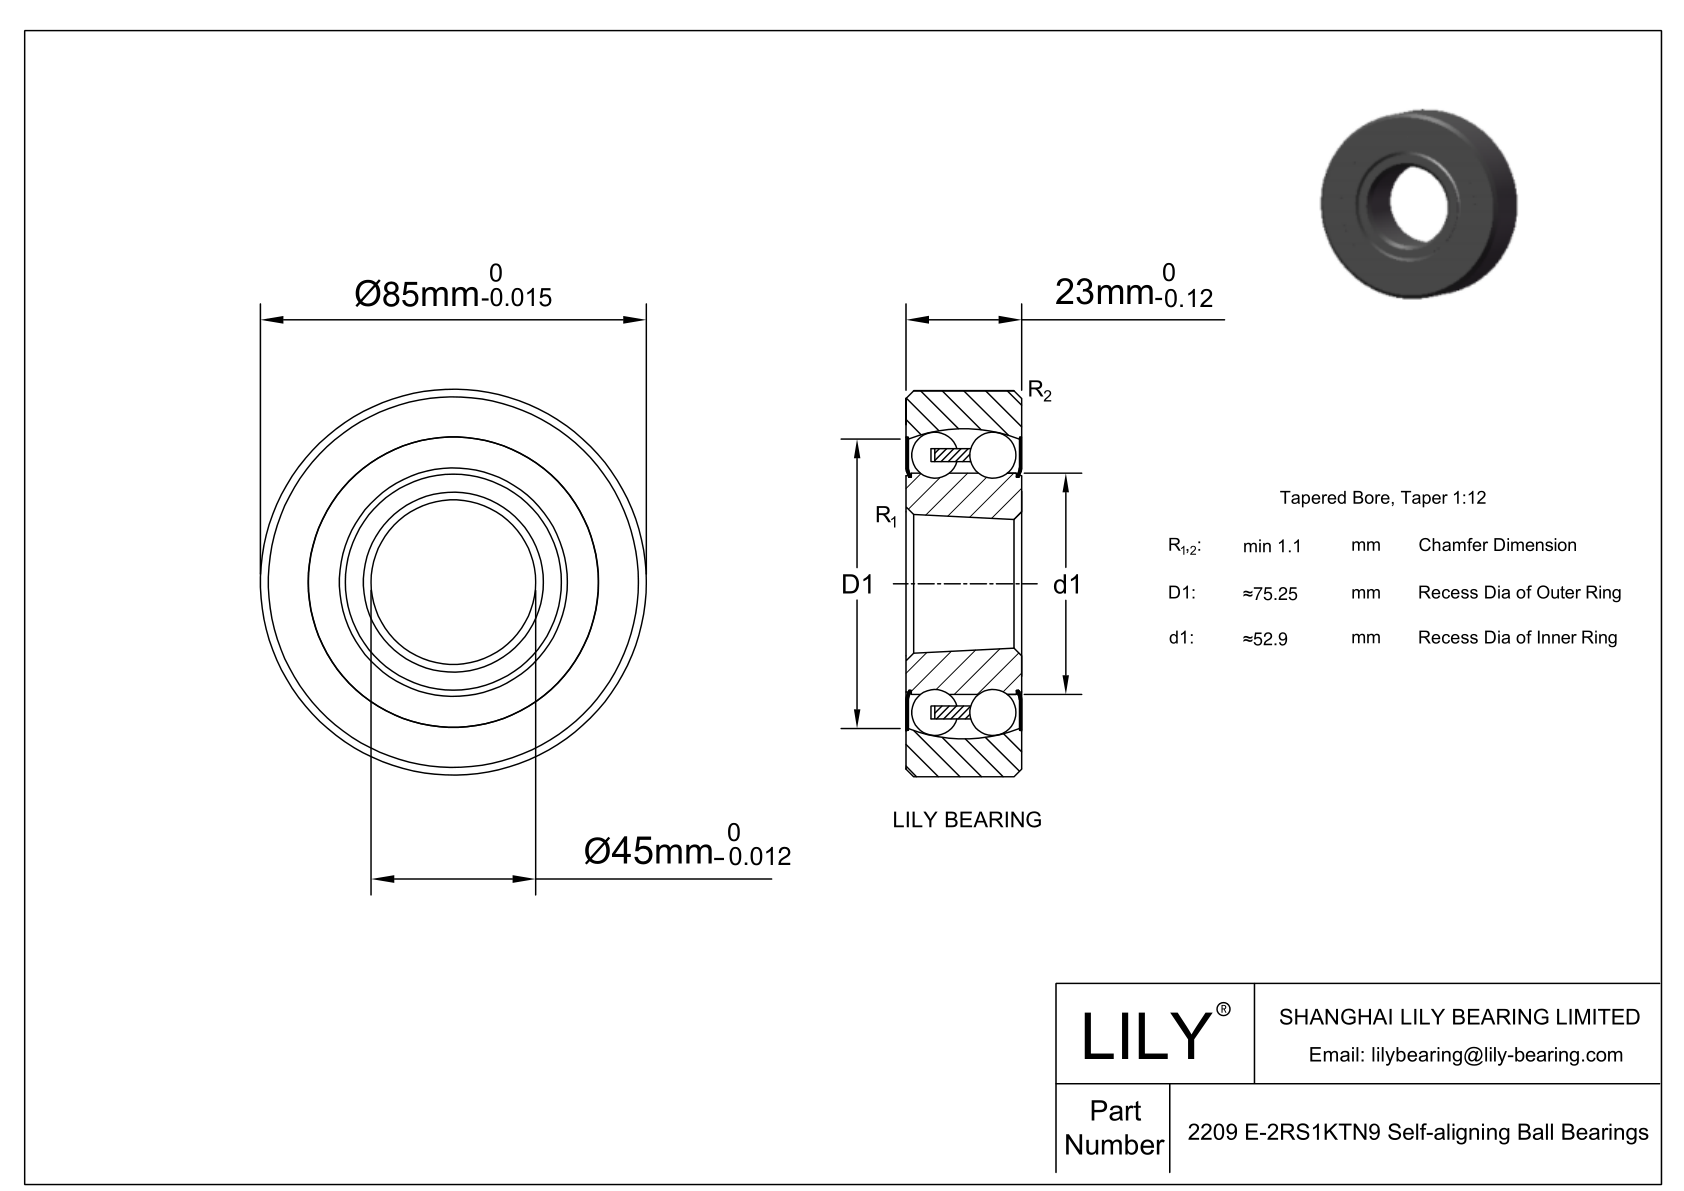 CE2209 E-SIPP Silicon Nitride Self Aligning Ball Bearings cad drawing